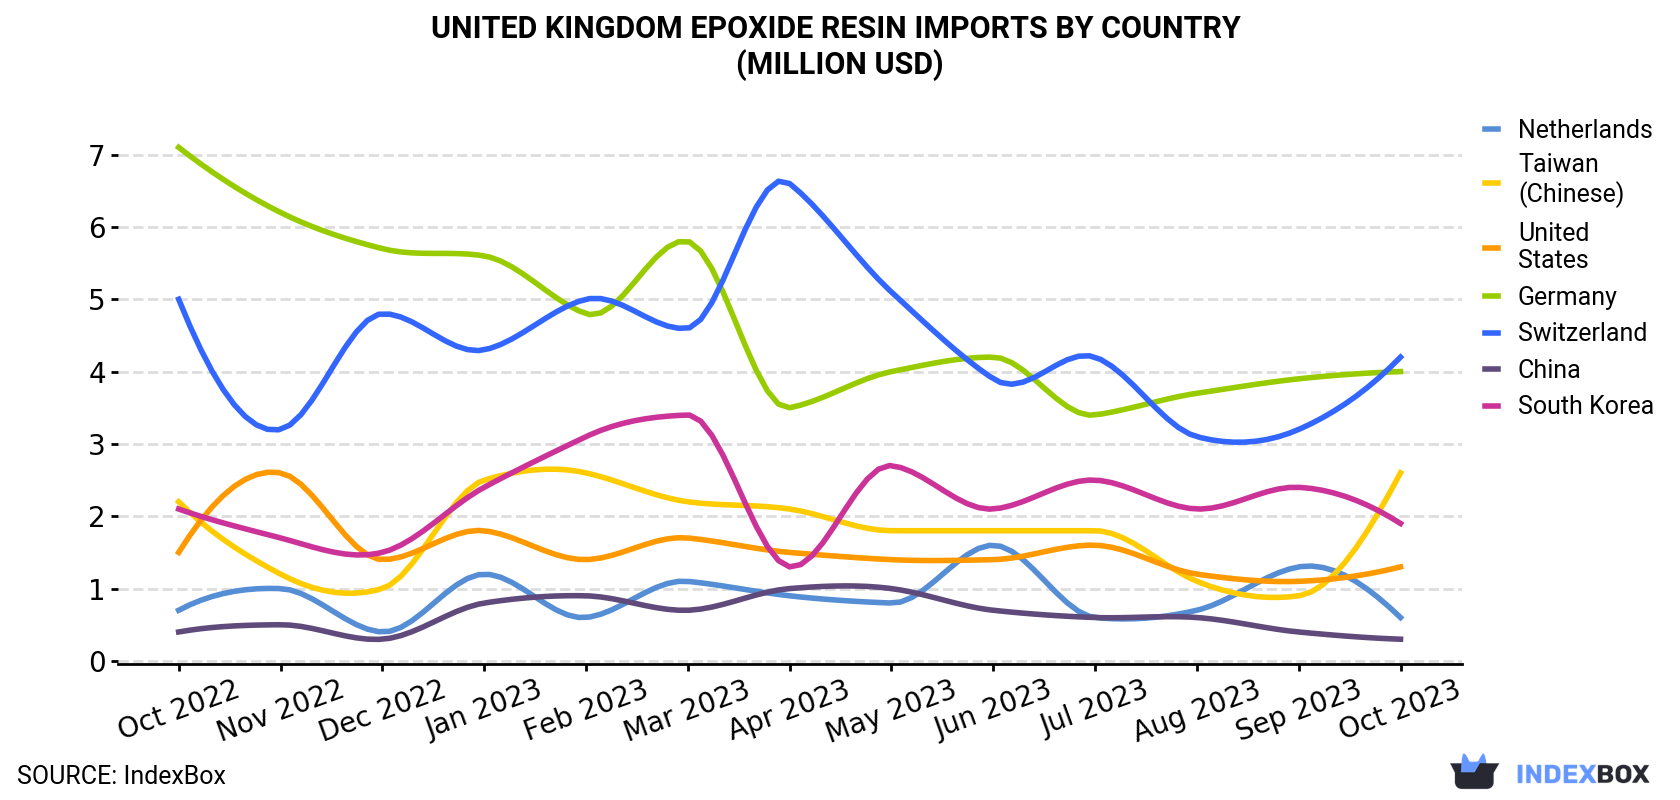 United Kingdom Epoxide Resin Imports By Country (Million USD)